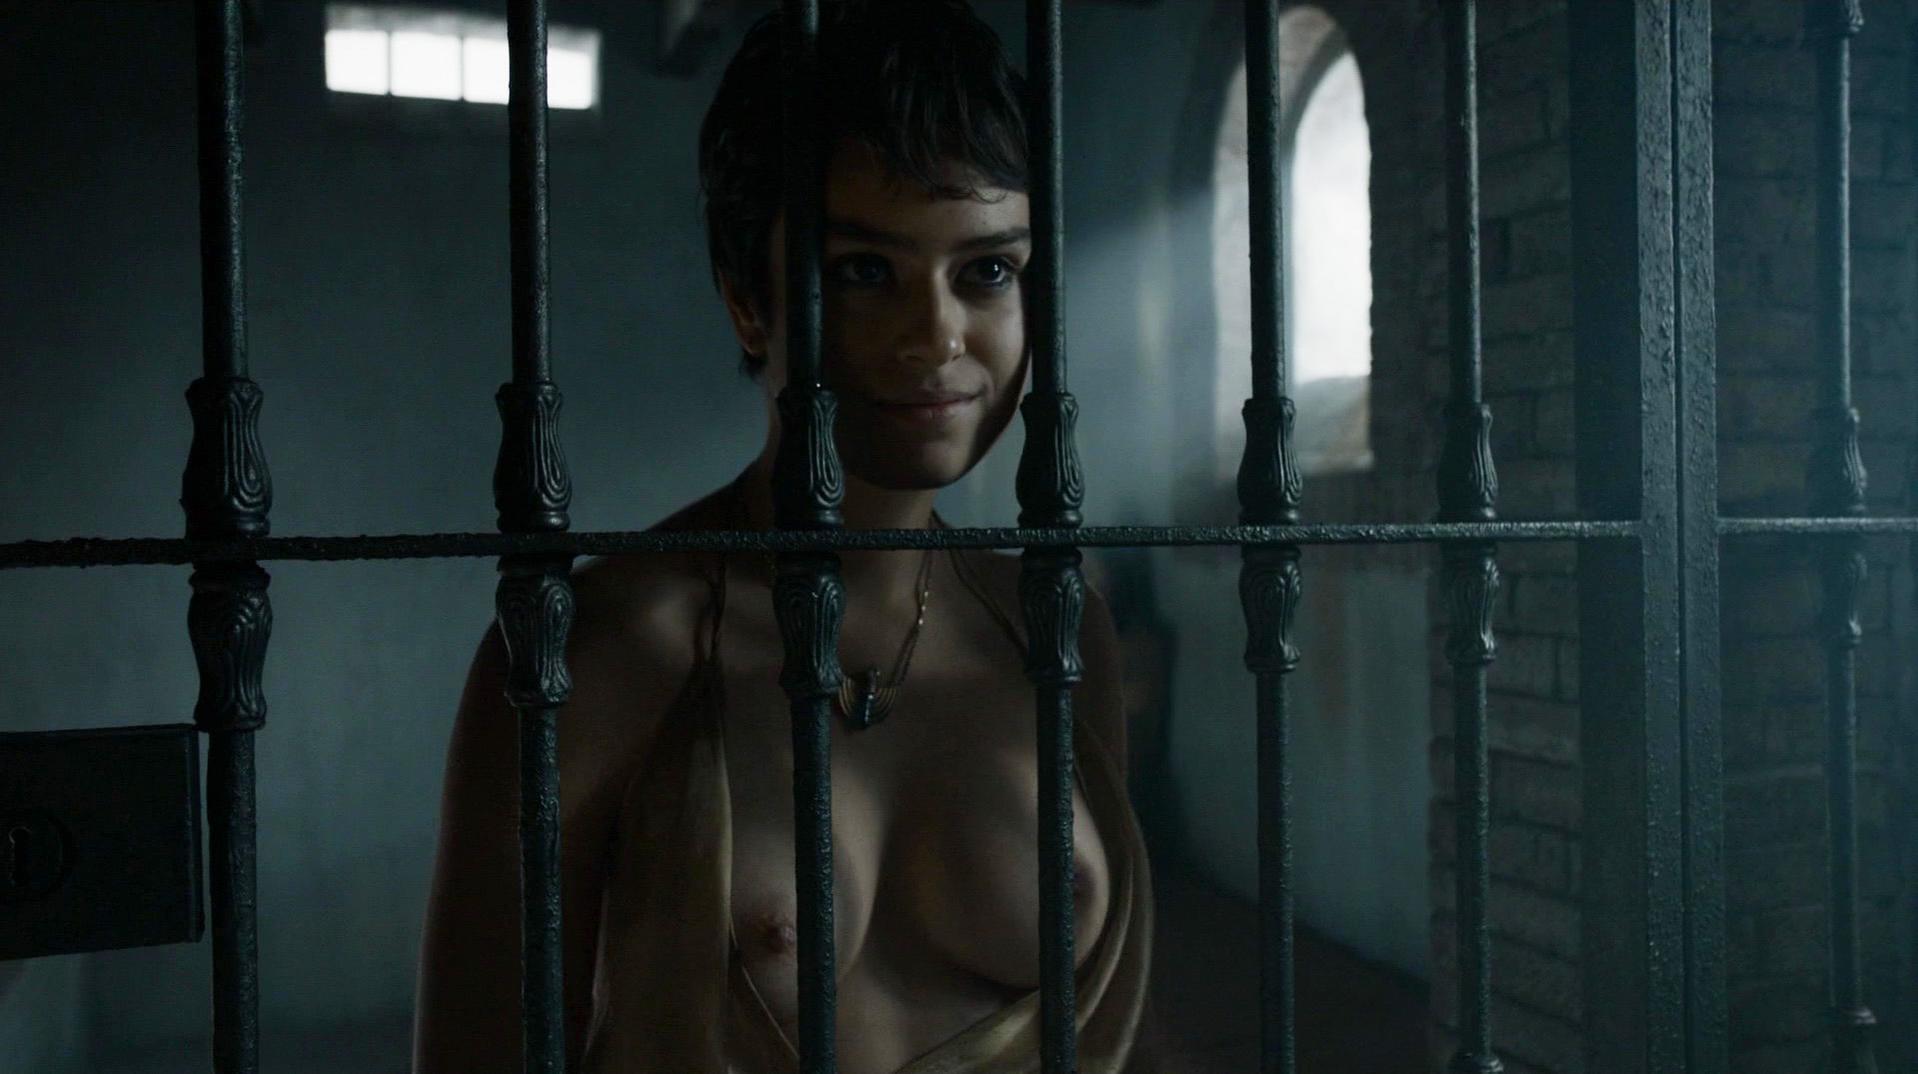 Rosabell Laurenti Sellers in nude scene from Game of Thrones s05e07 which w...